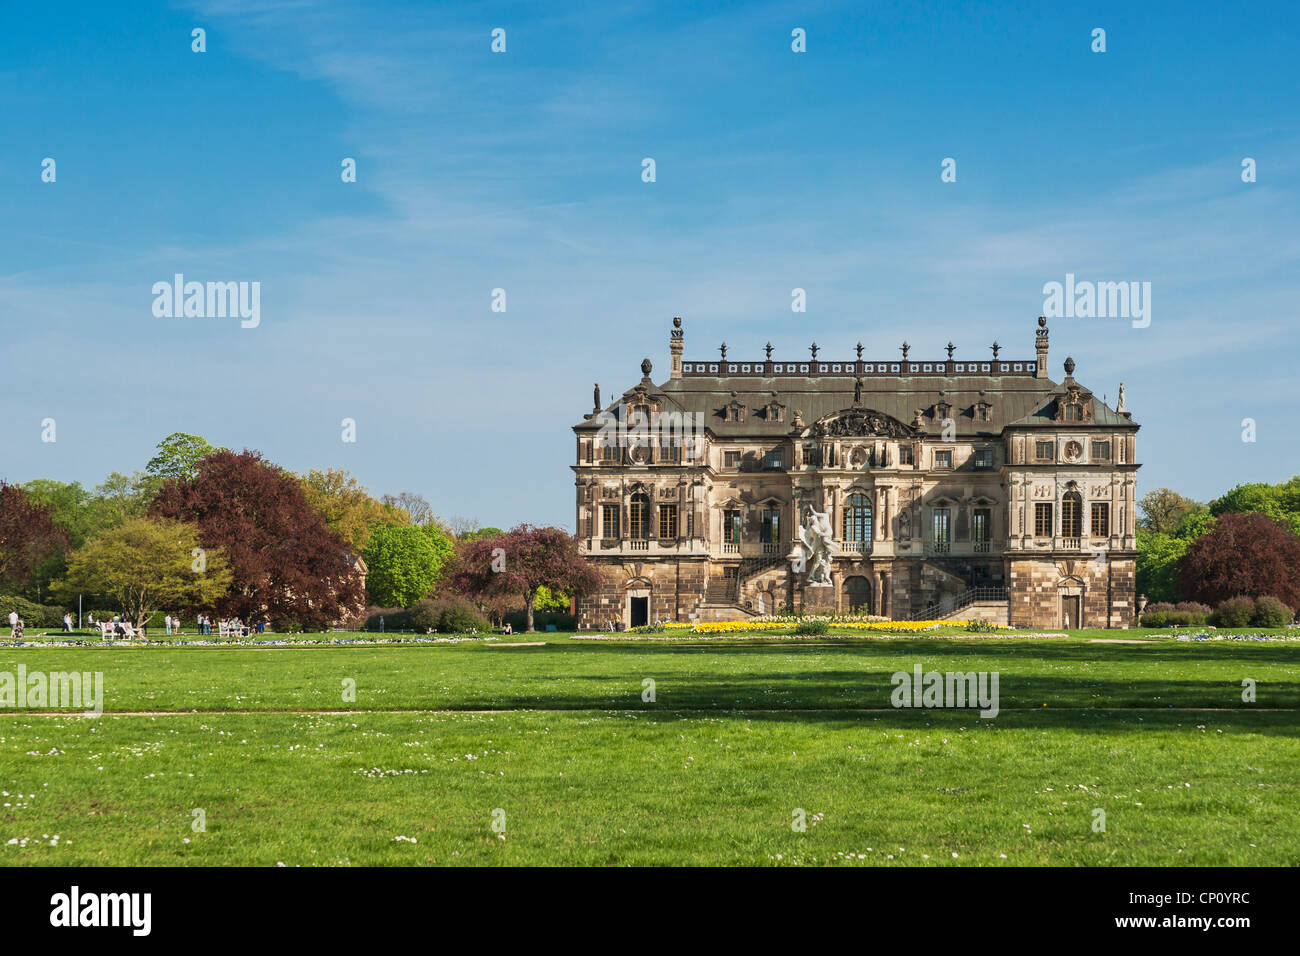 Palace in the Great Garden Park, Dresden, Saxony, Germany, Europe Stock Photo